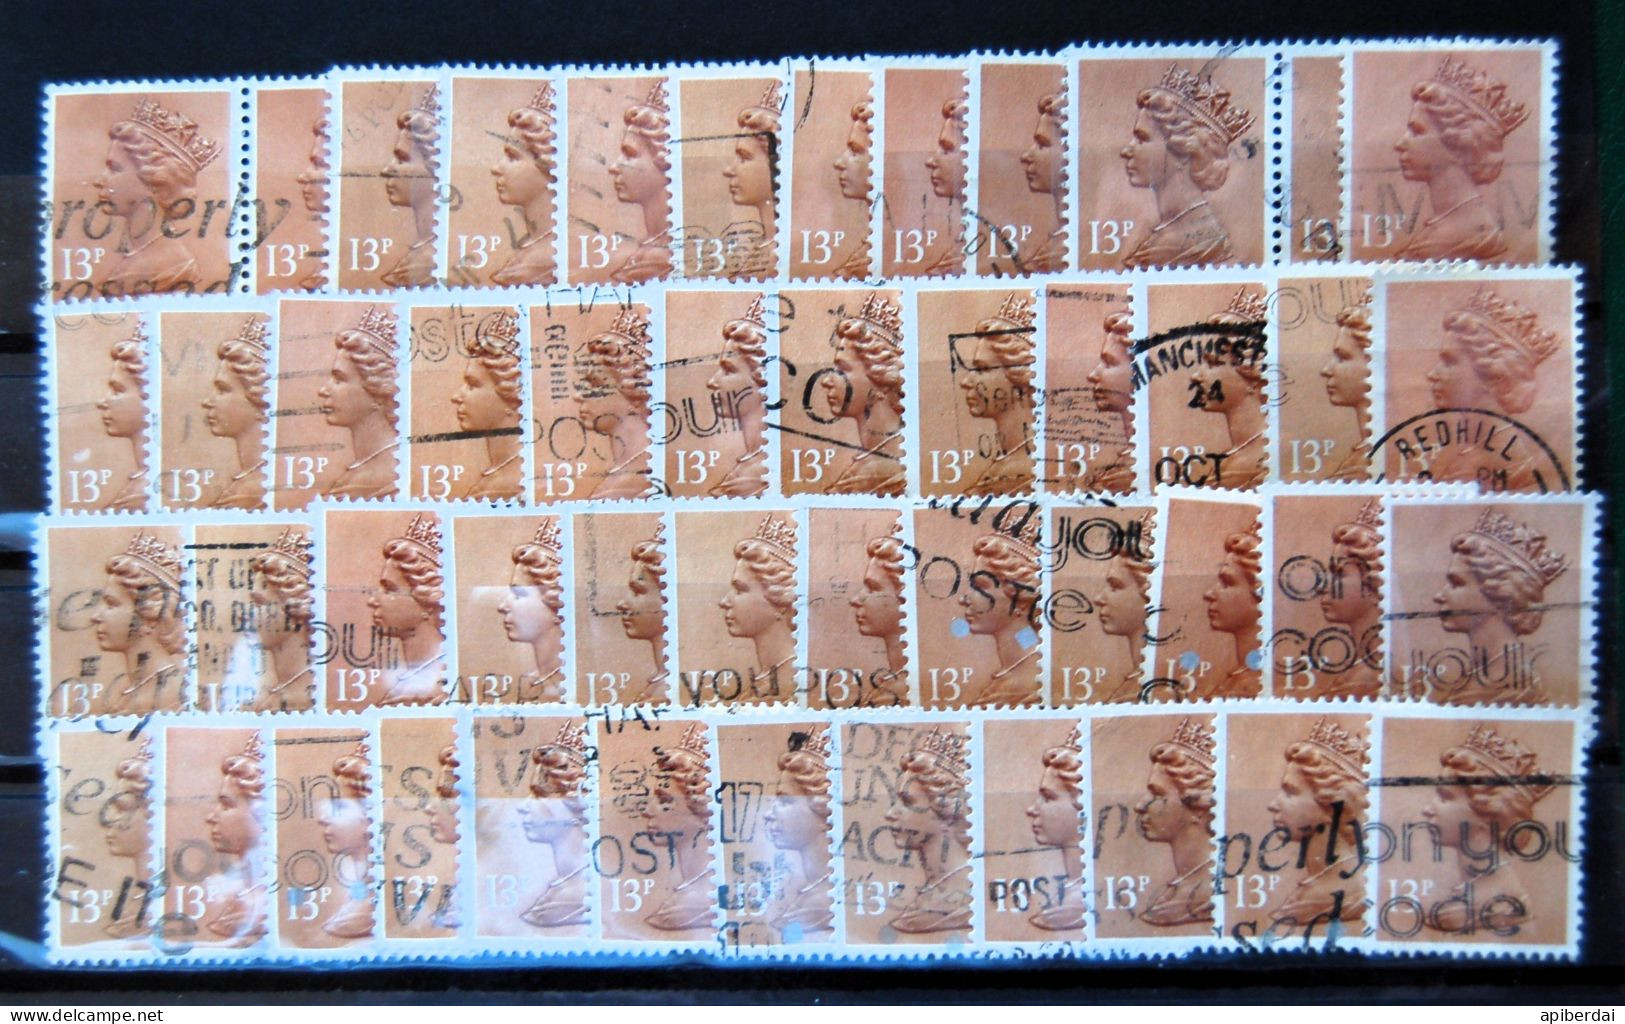 Angleterre Great-britain  - Accumulation Of 48 Machin Stamps 13p Used - Machins